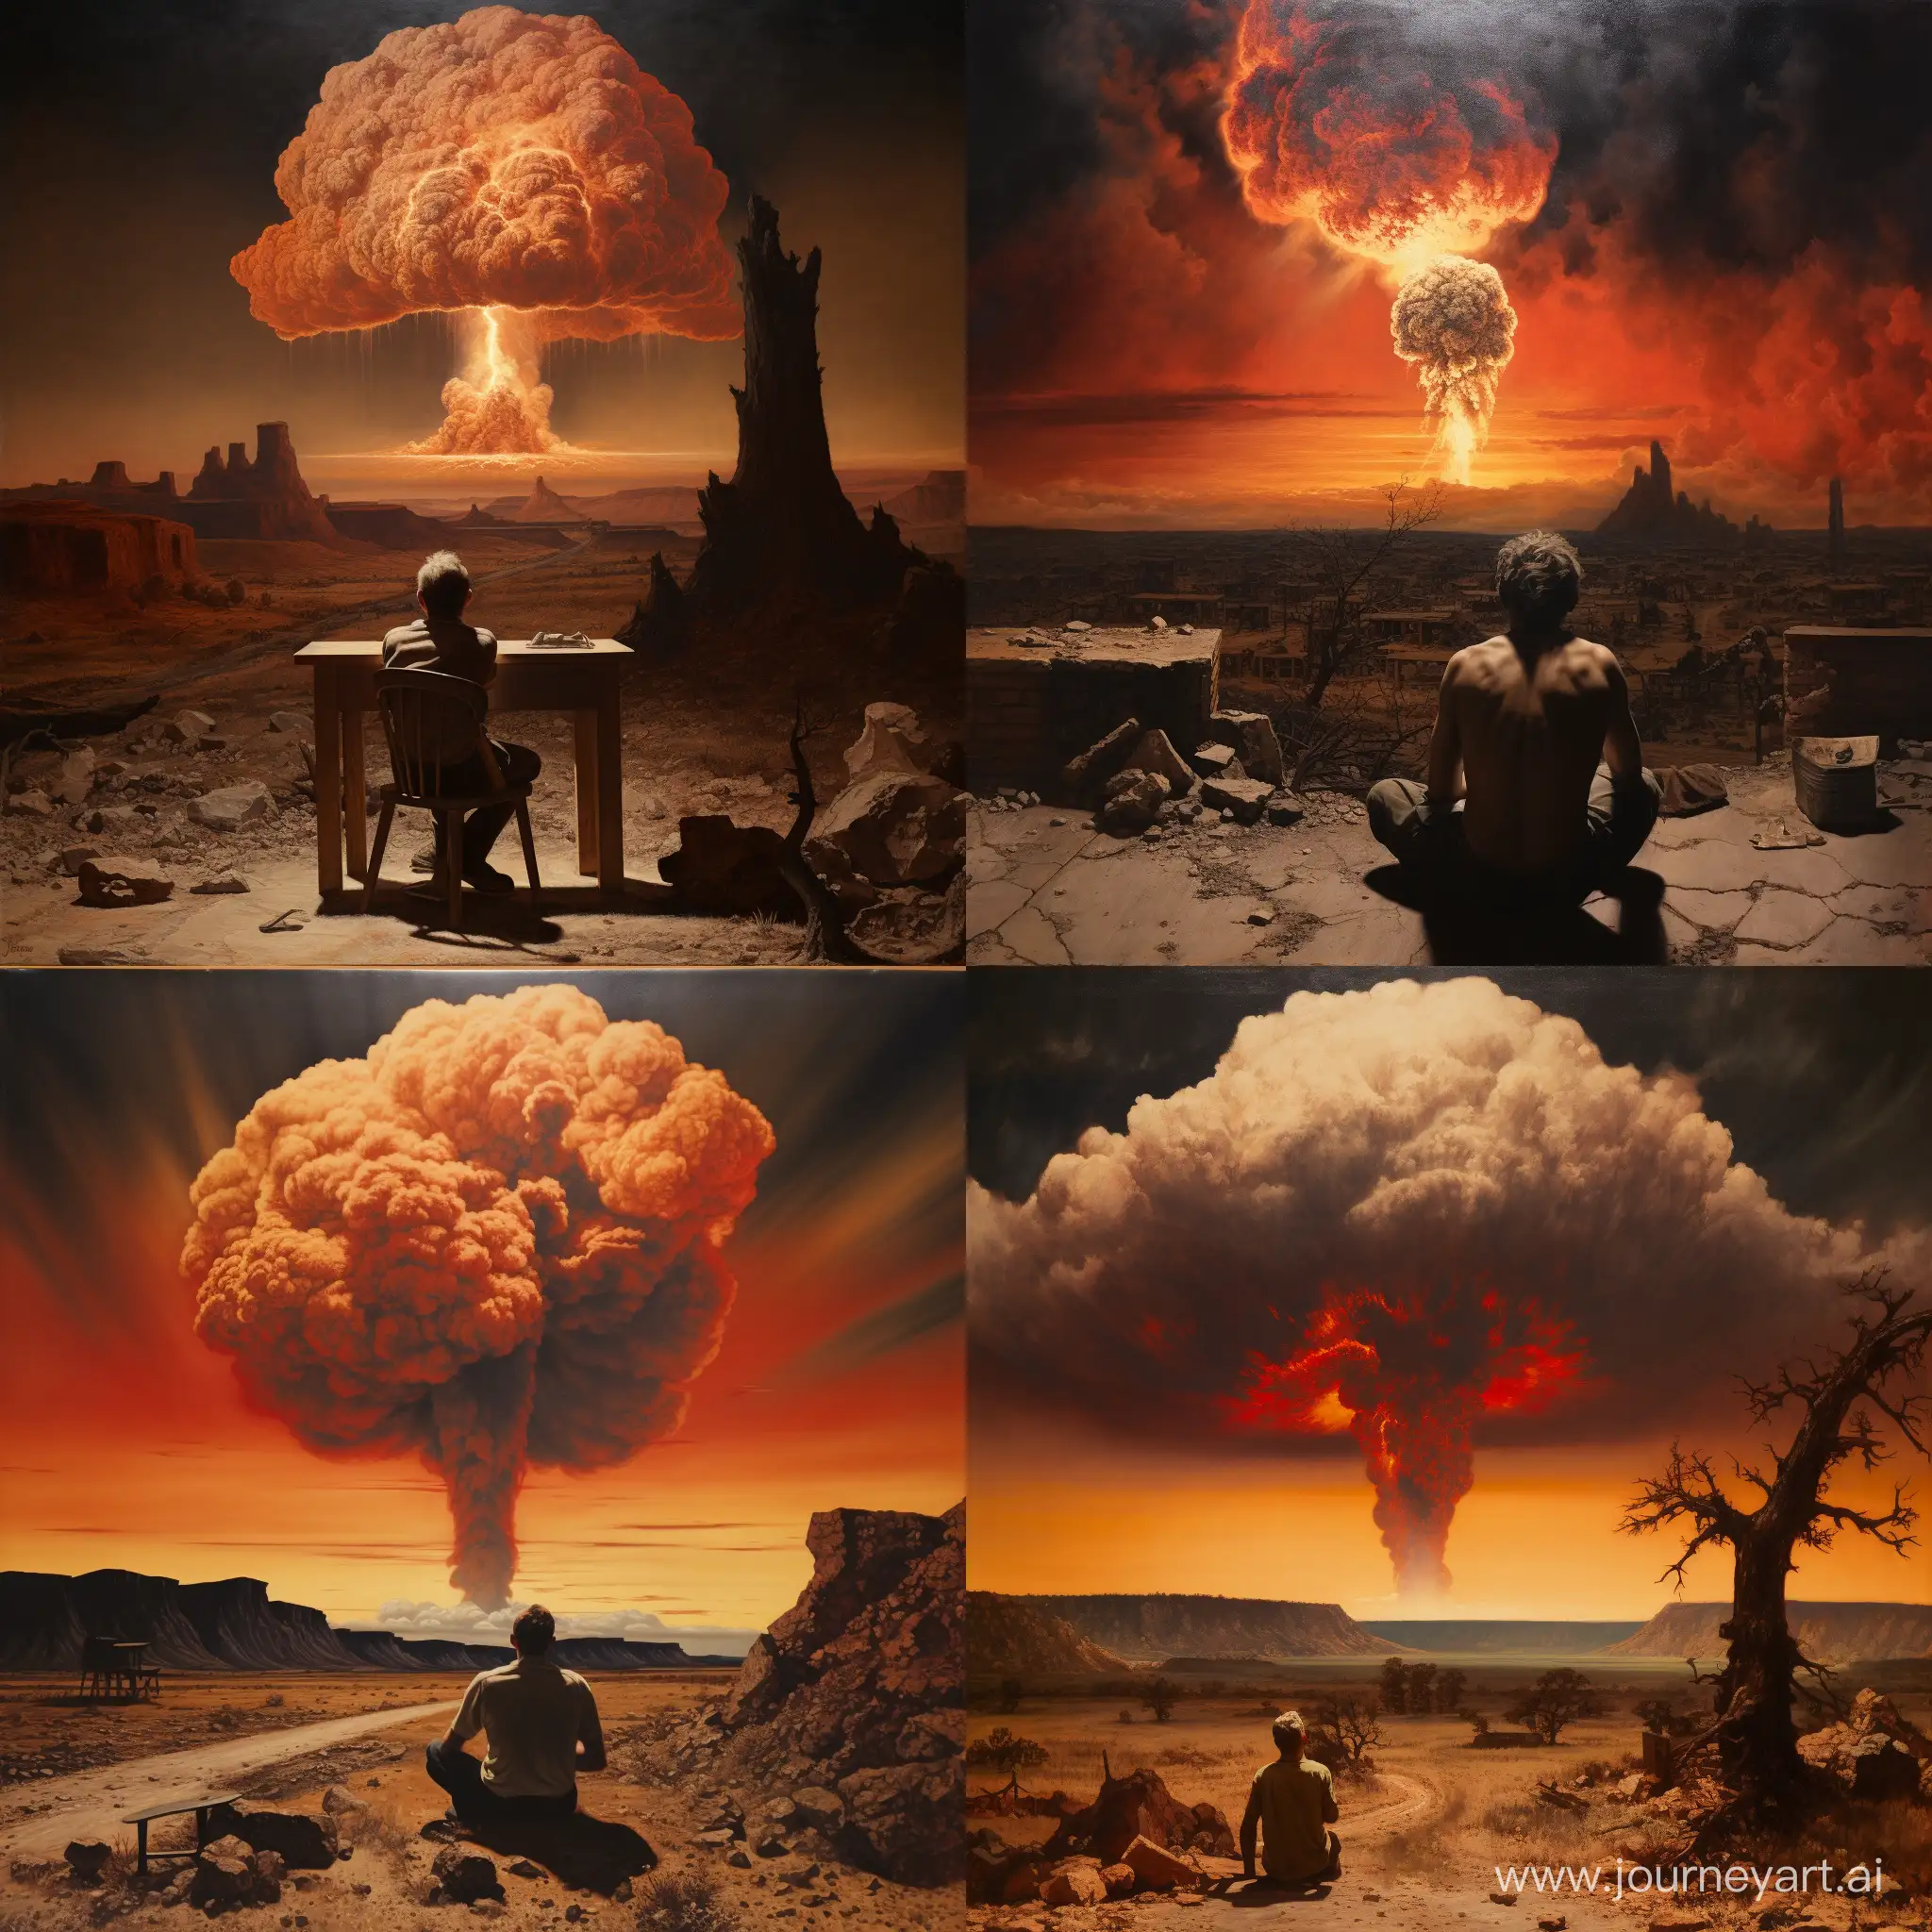 Nuclear-Apocalypse-Dark-Realistic-Oil-Painting-of-a-Man-Witnessing-the-1940s-Bomb-Drop